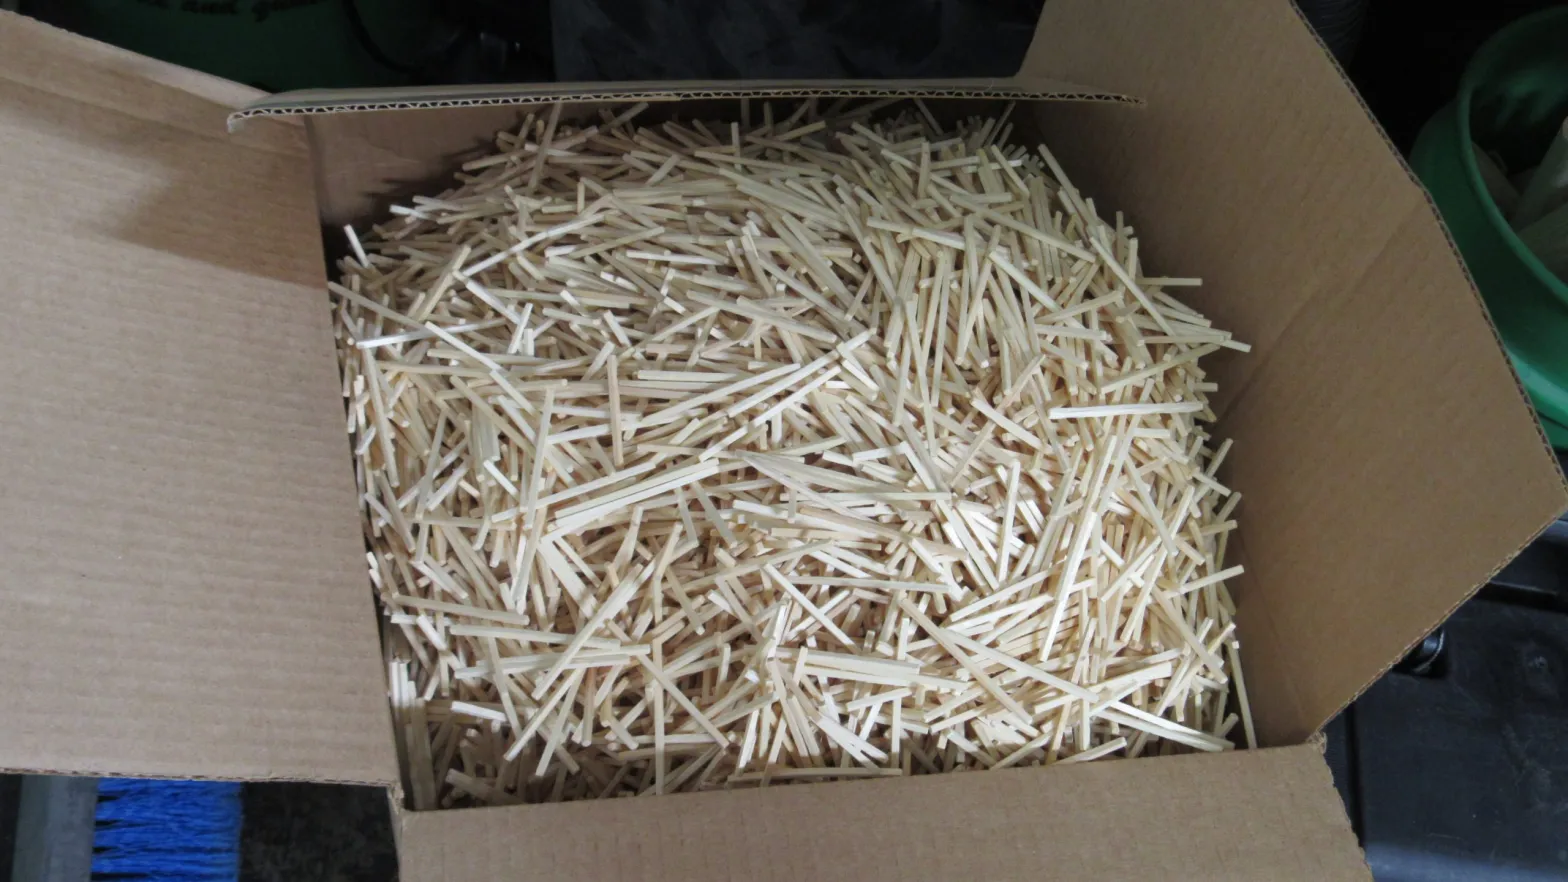 A cardboard box filled to the brim with pale wooden matchsticks sits open.